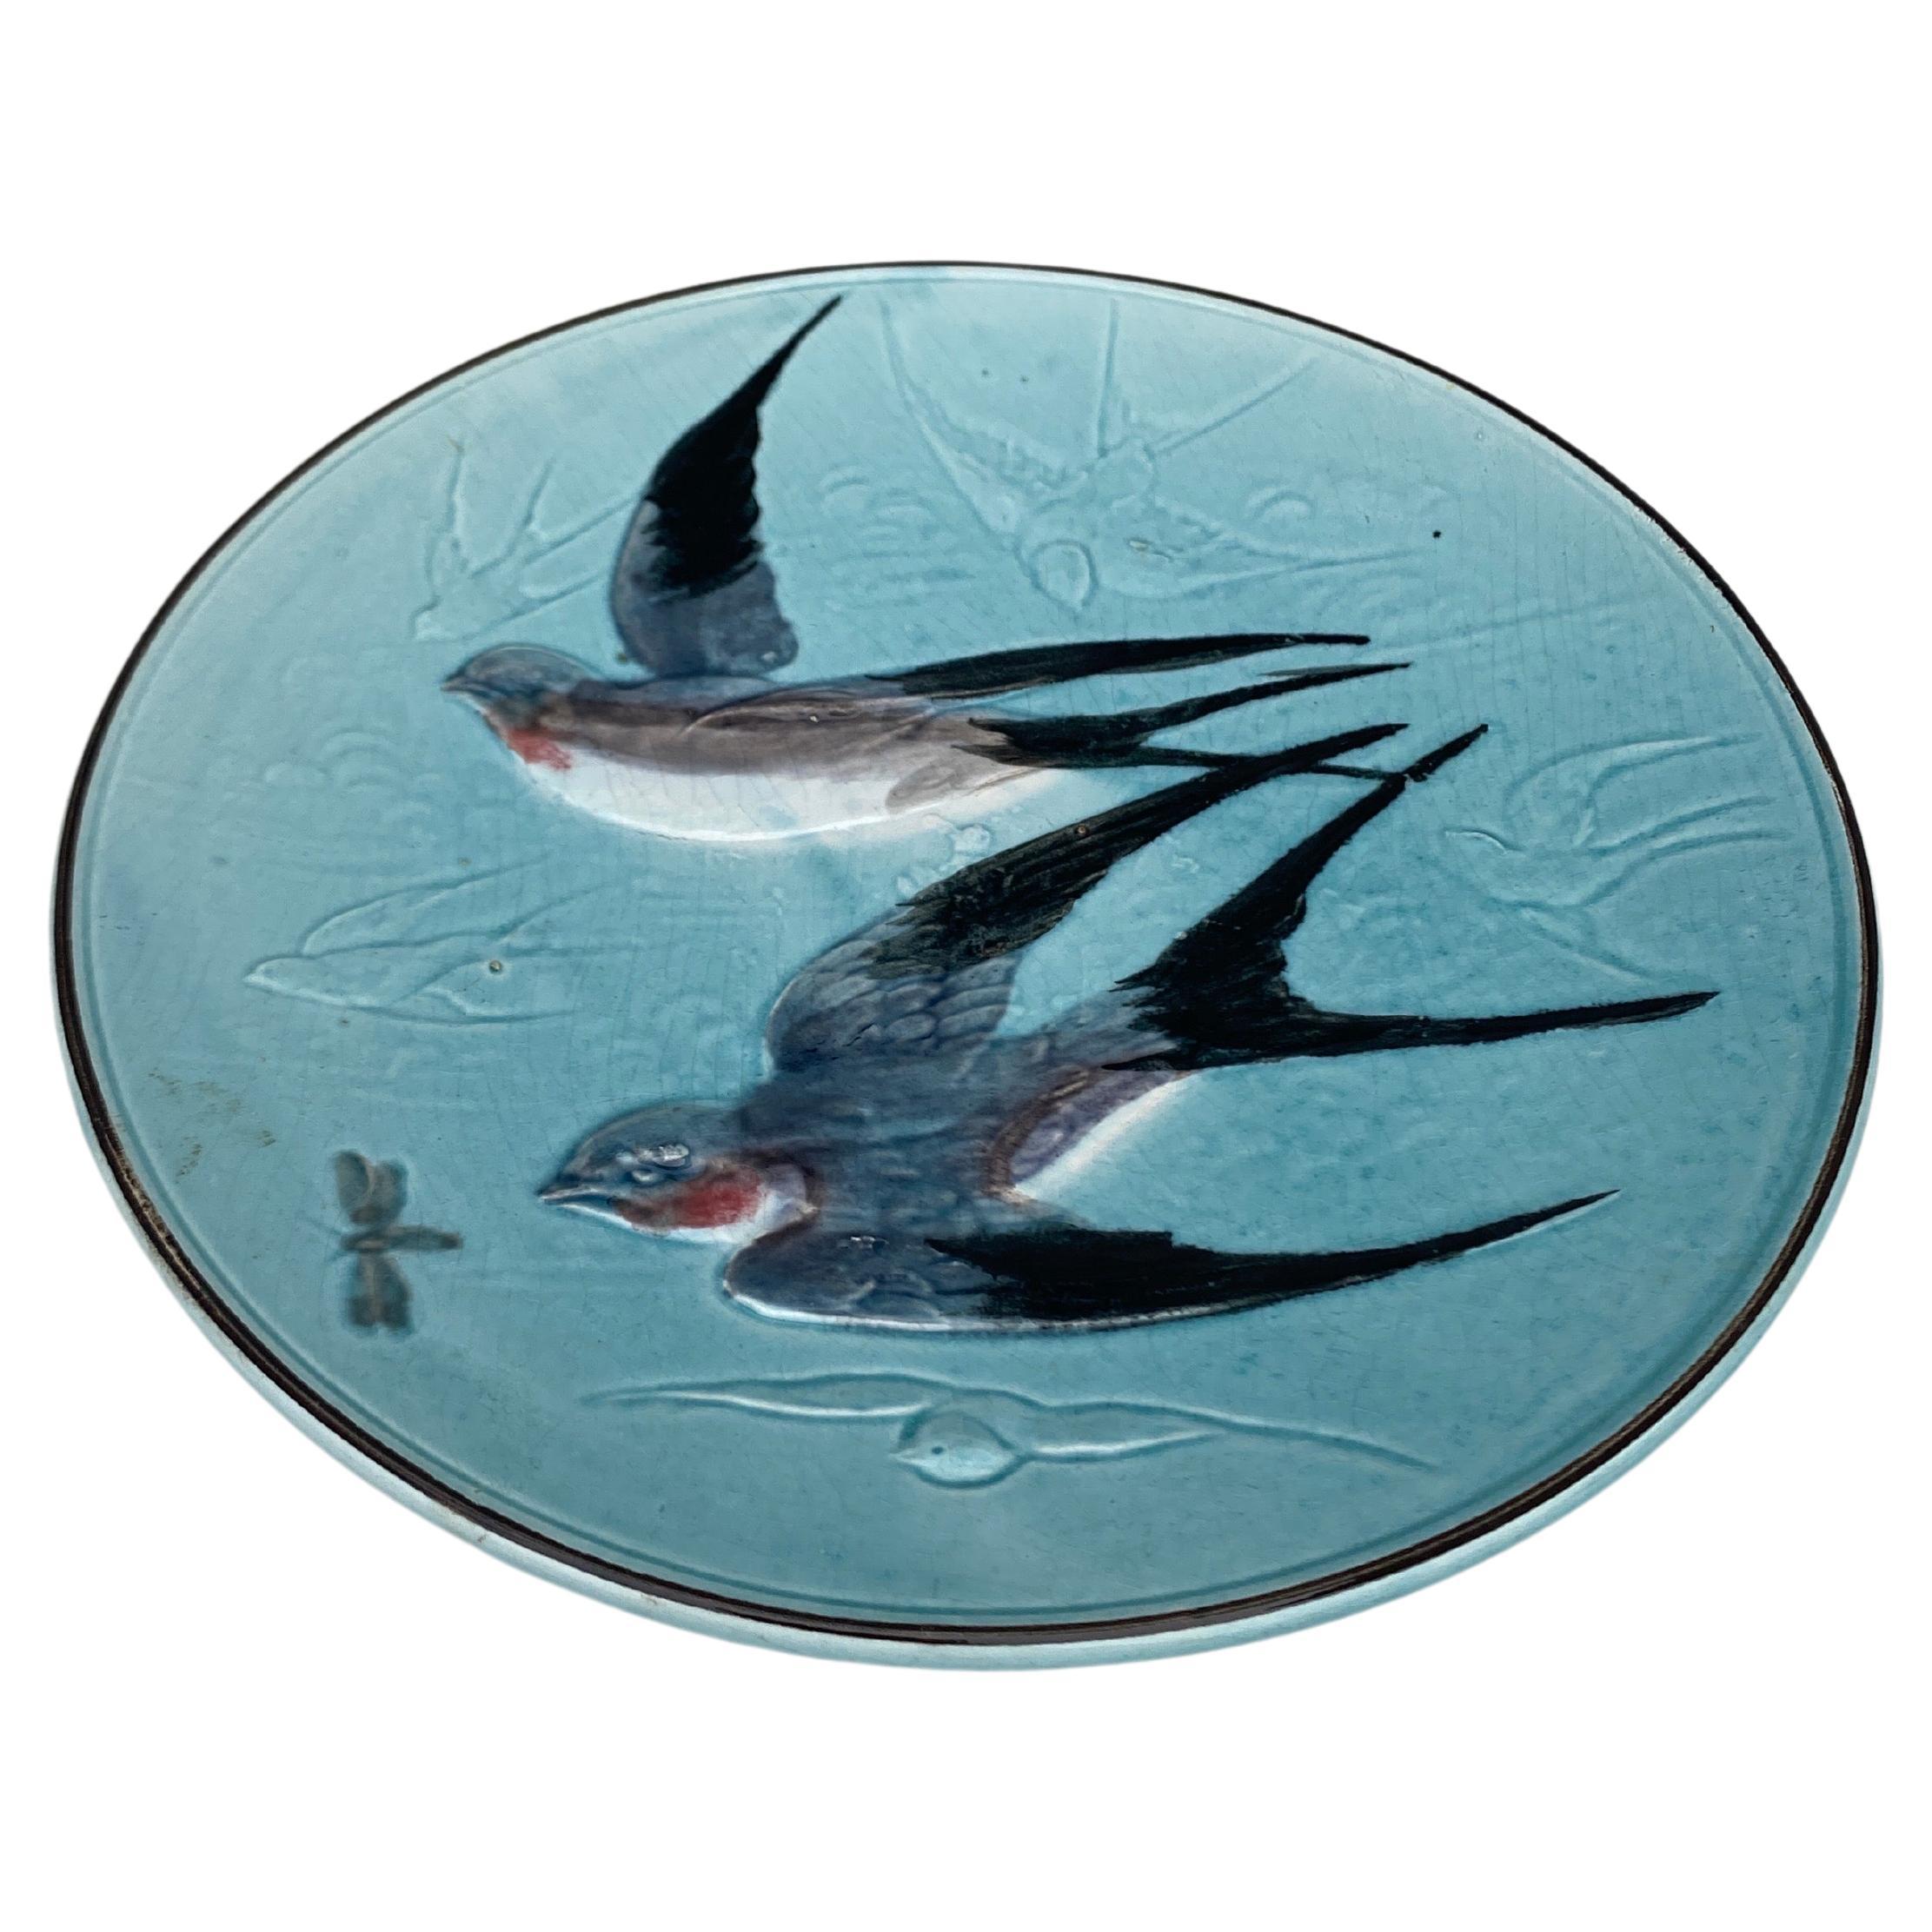 German majolica aqua plate with birds swallow and insect circa 1900.
